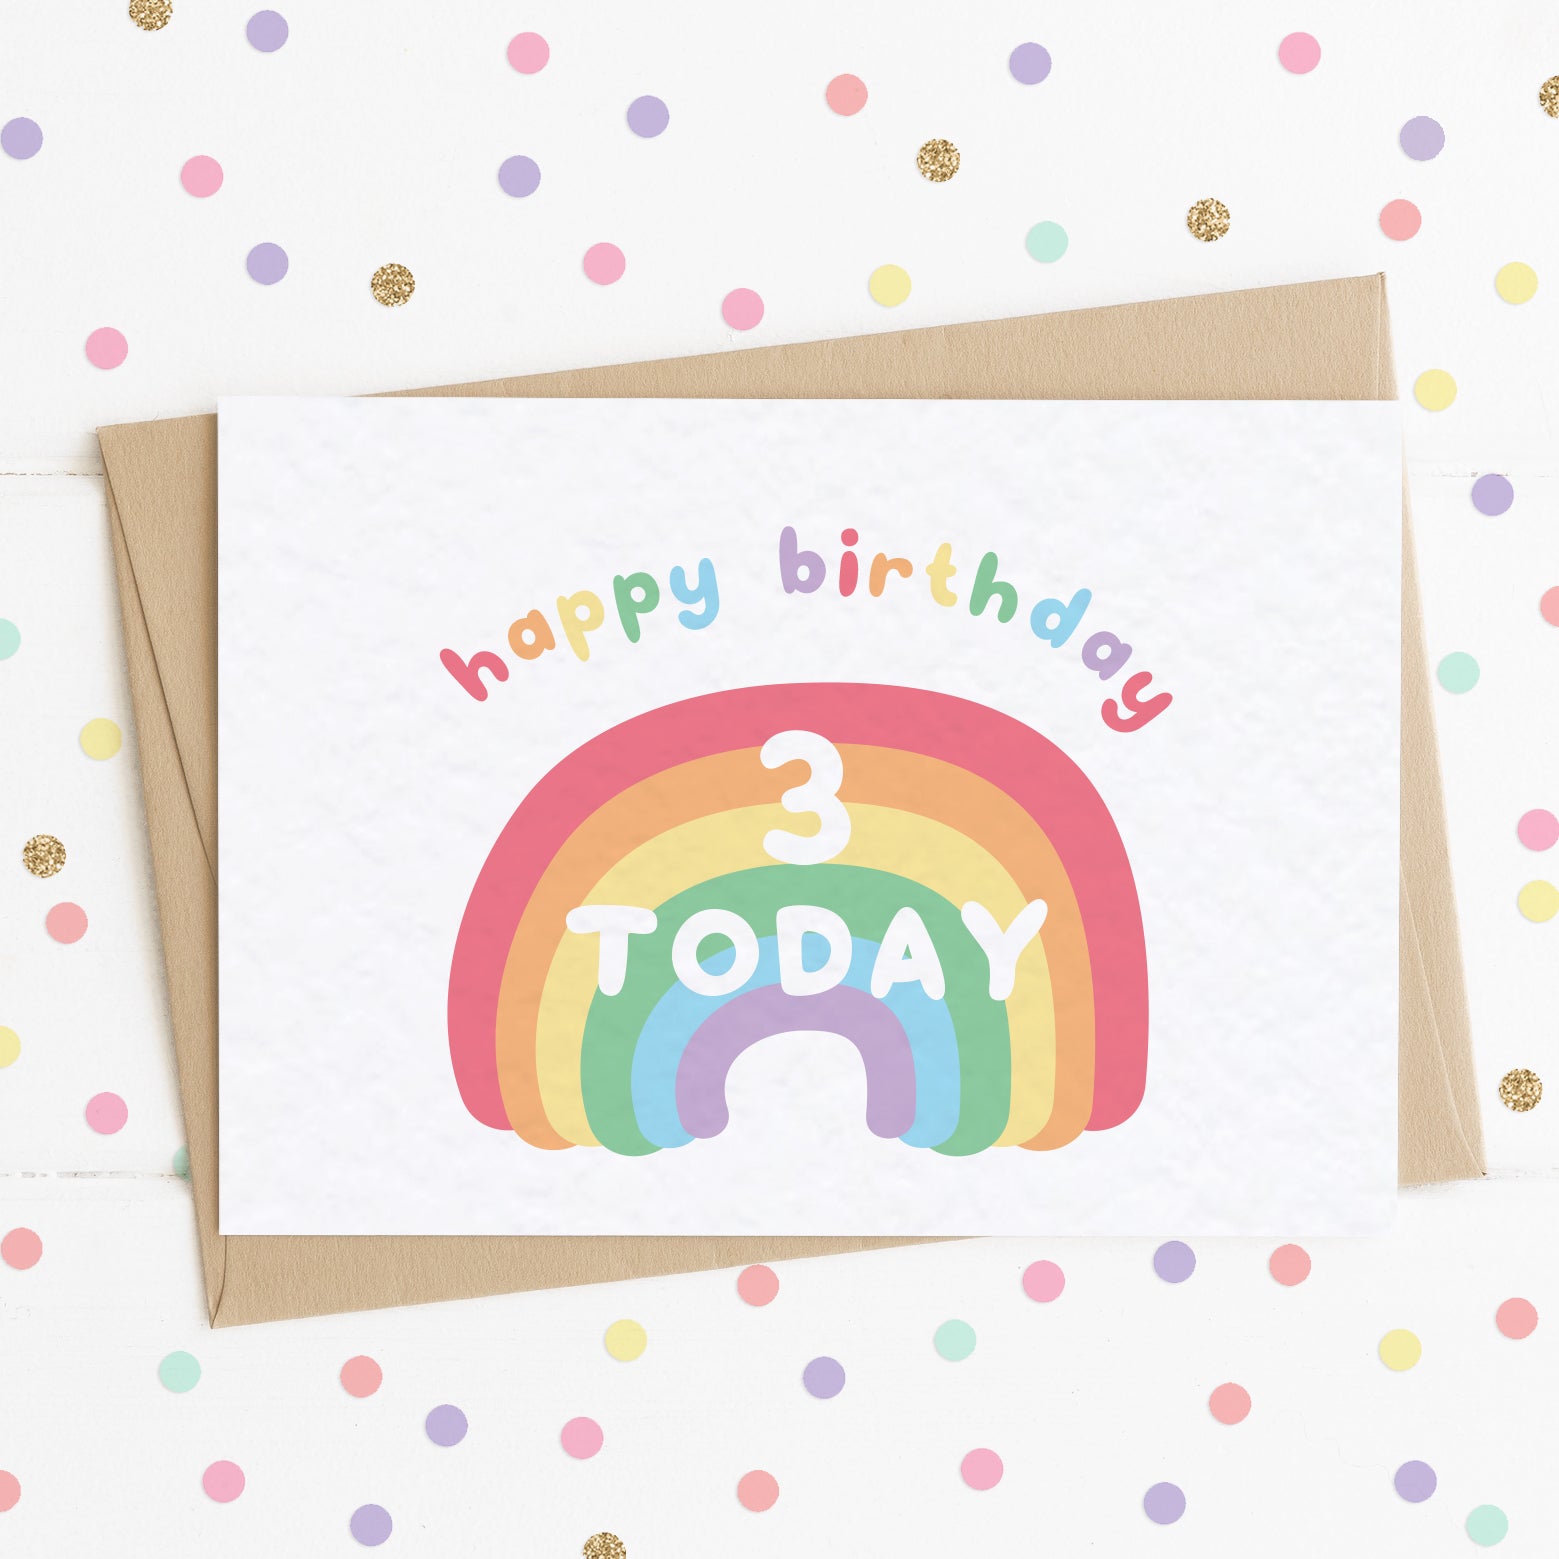 A cute milestone age birthday card with a smiling happy rainbow on it and the message "HAPPY BIRTHDAY - 2 TODAY".